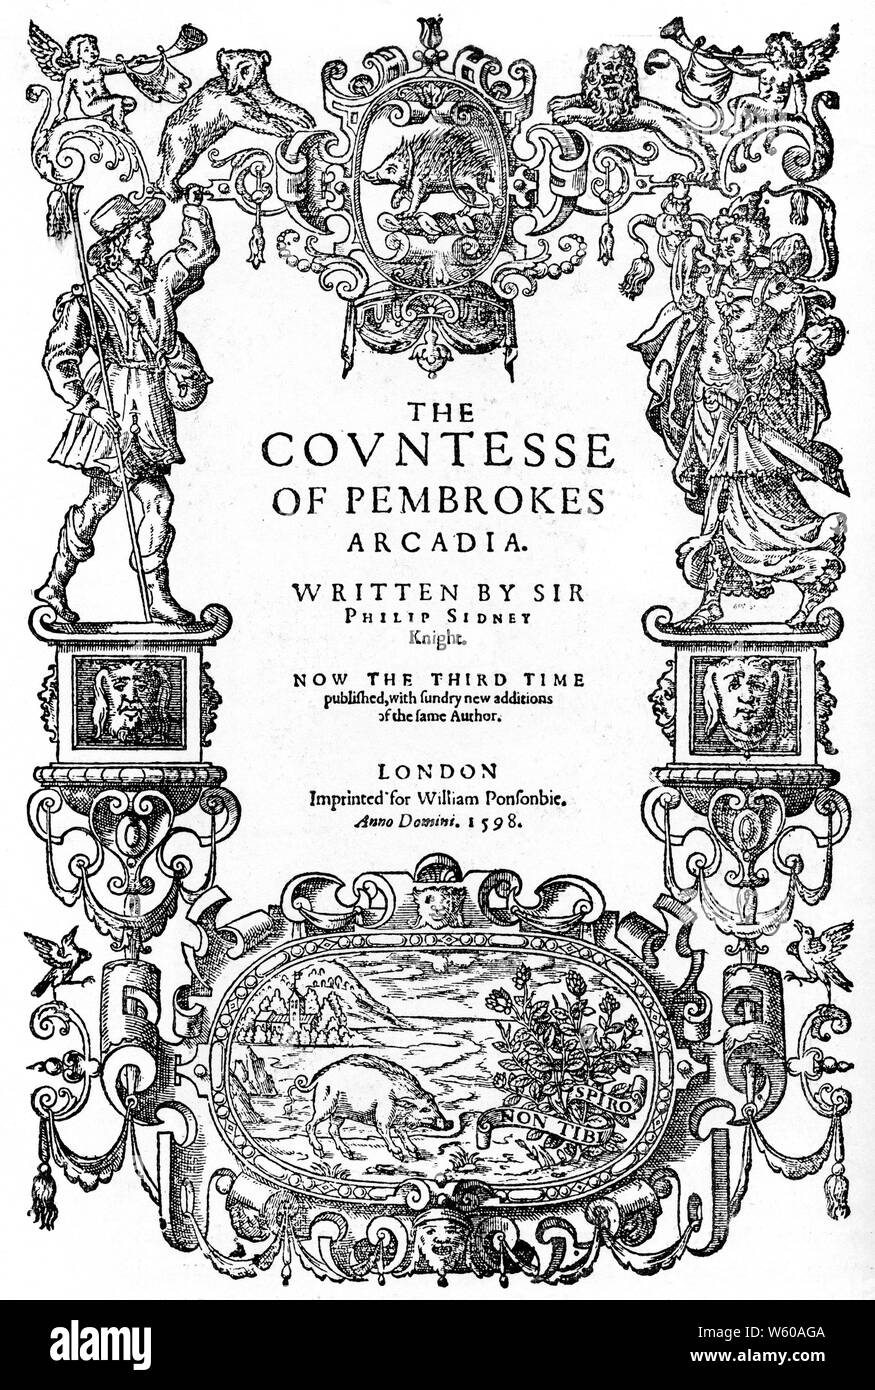 The Countess of Pembroke's Arcadia, by Sir Philip Sidney, 1598. The Title page of the third edition of the Countess of Pembroke's Arcadia, by Sir Philip Sidney (1554-1586), 1598. Stock Photo